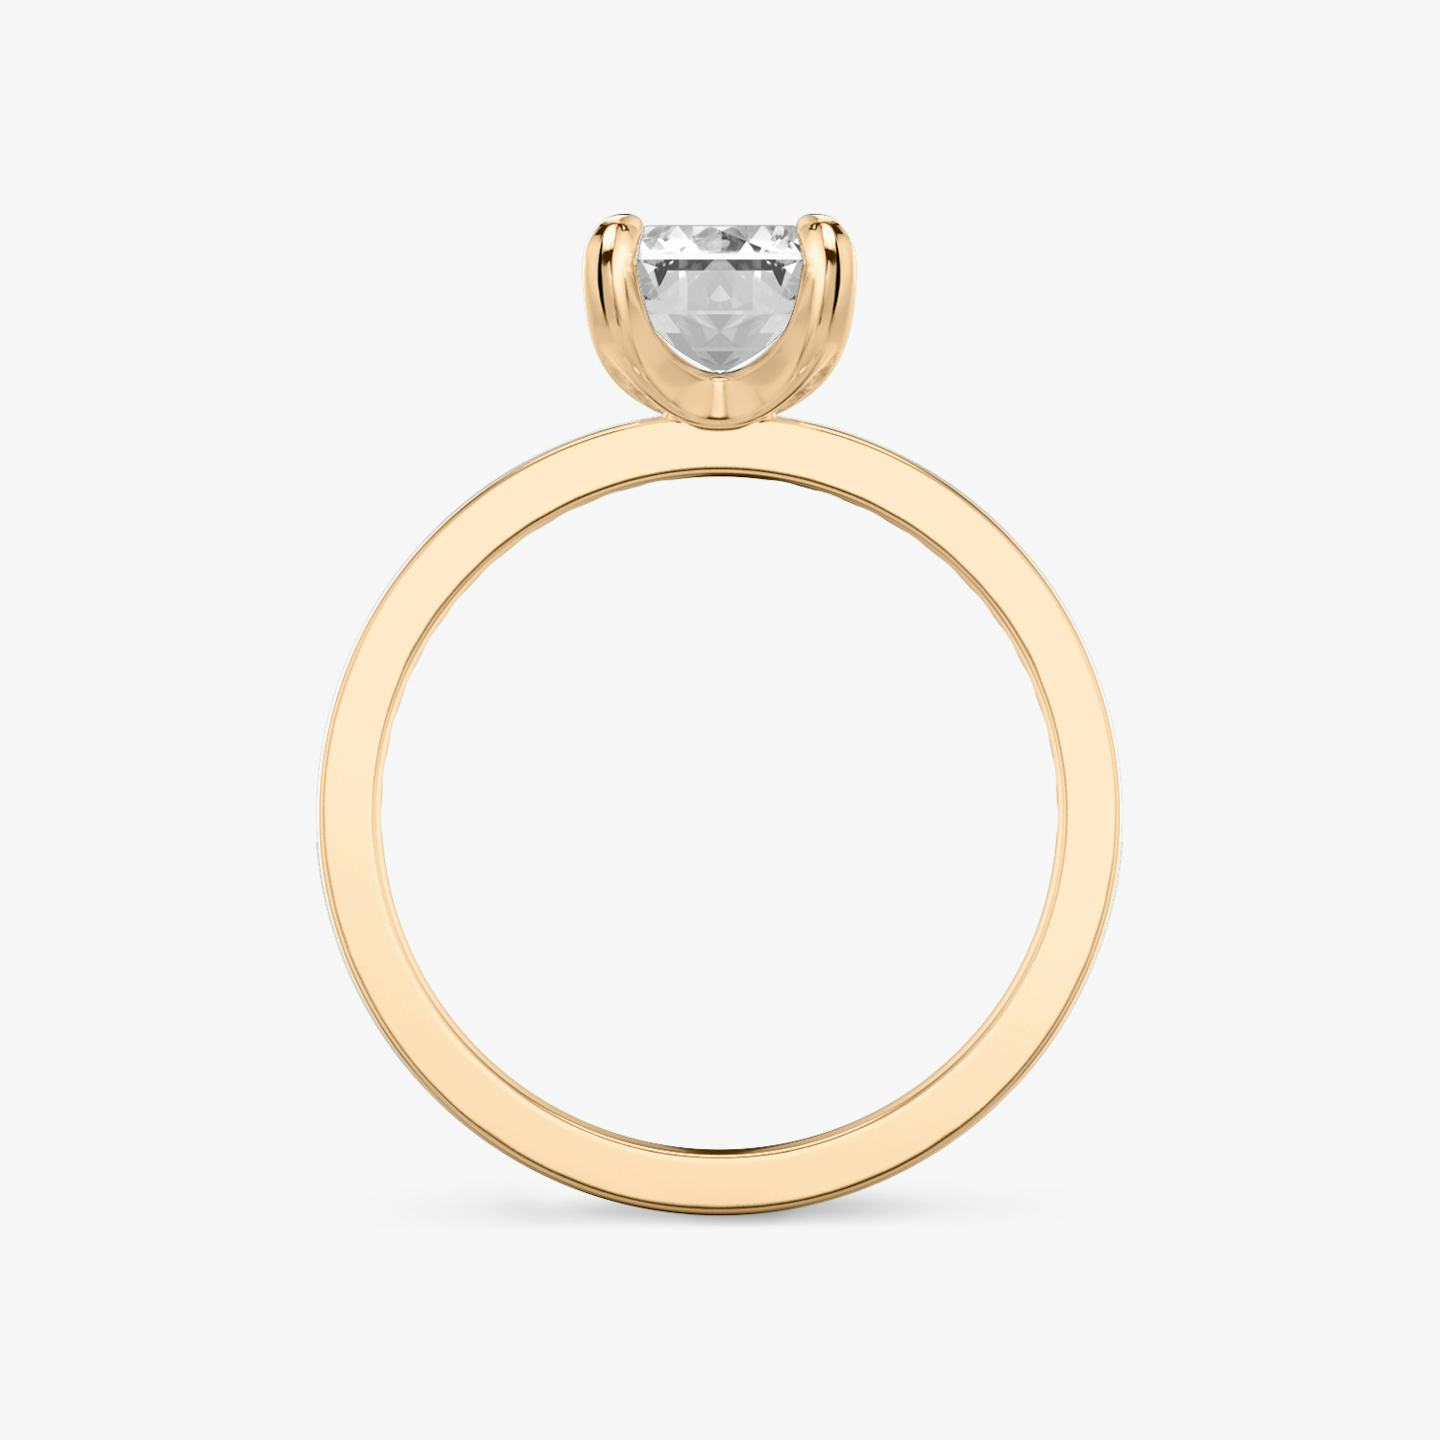 The Devotion | Emerald | 14k | 14k Rose Gold | Band stone shape: Round Brilliant | Band: Original | Diamond orientation: vertical | Carat weight: See full inventory